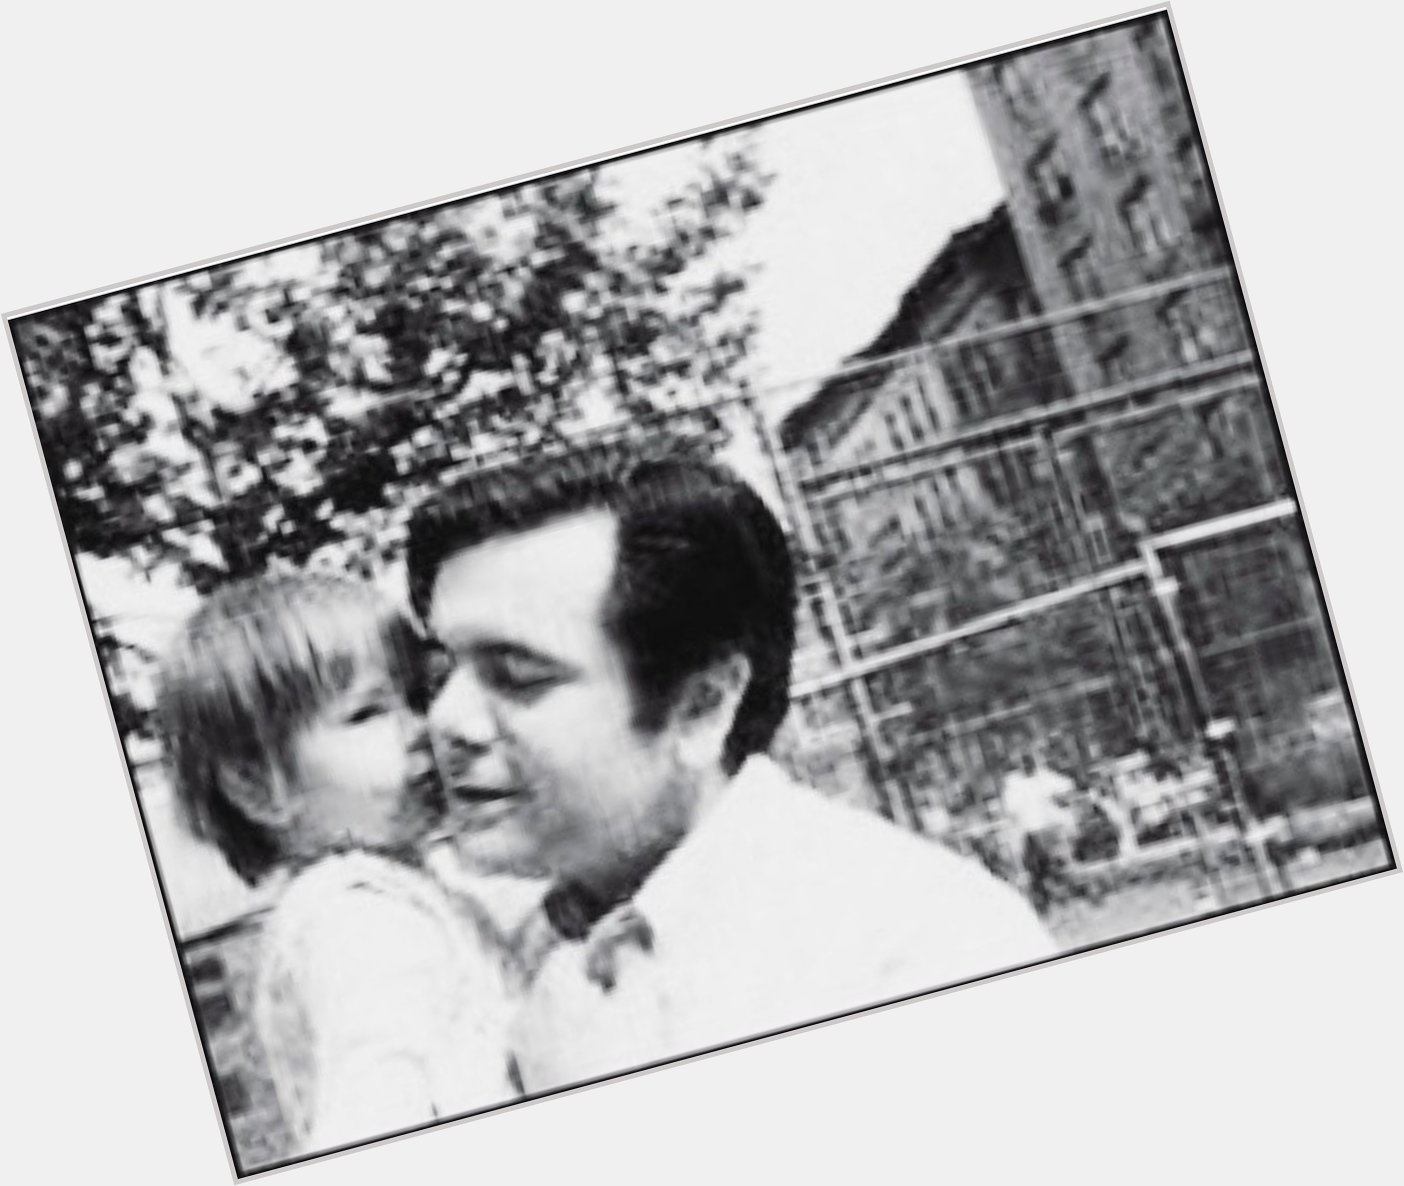 A very Happy Birthday to my father Paul Sorvino. I miss you so much and hope to be together in person very soon! 